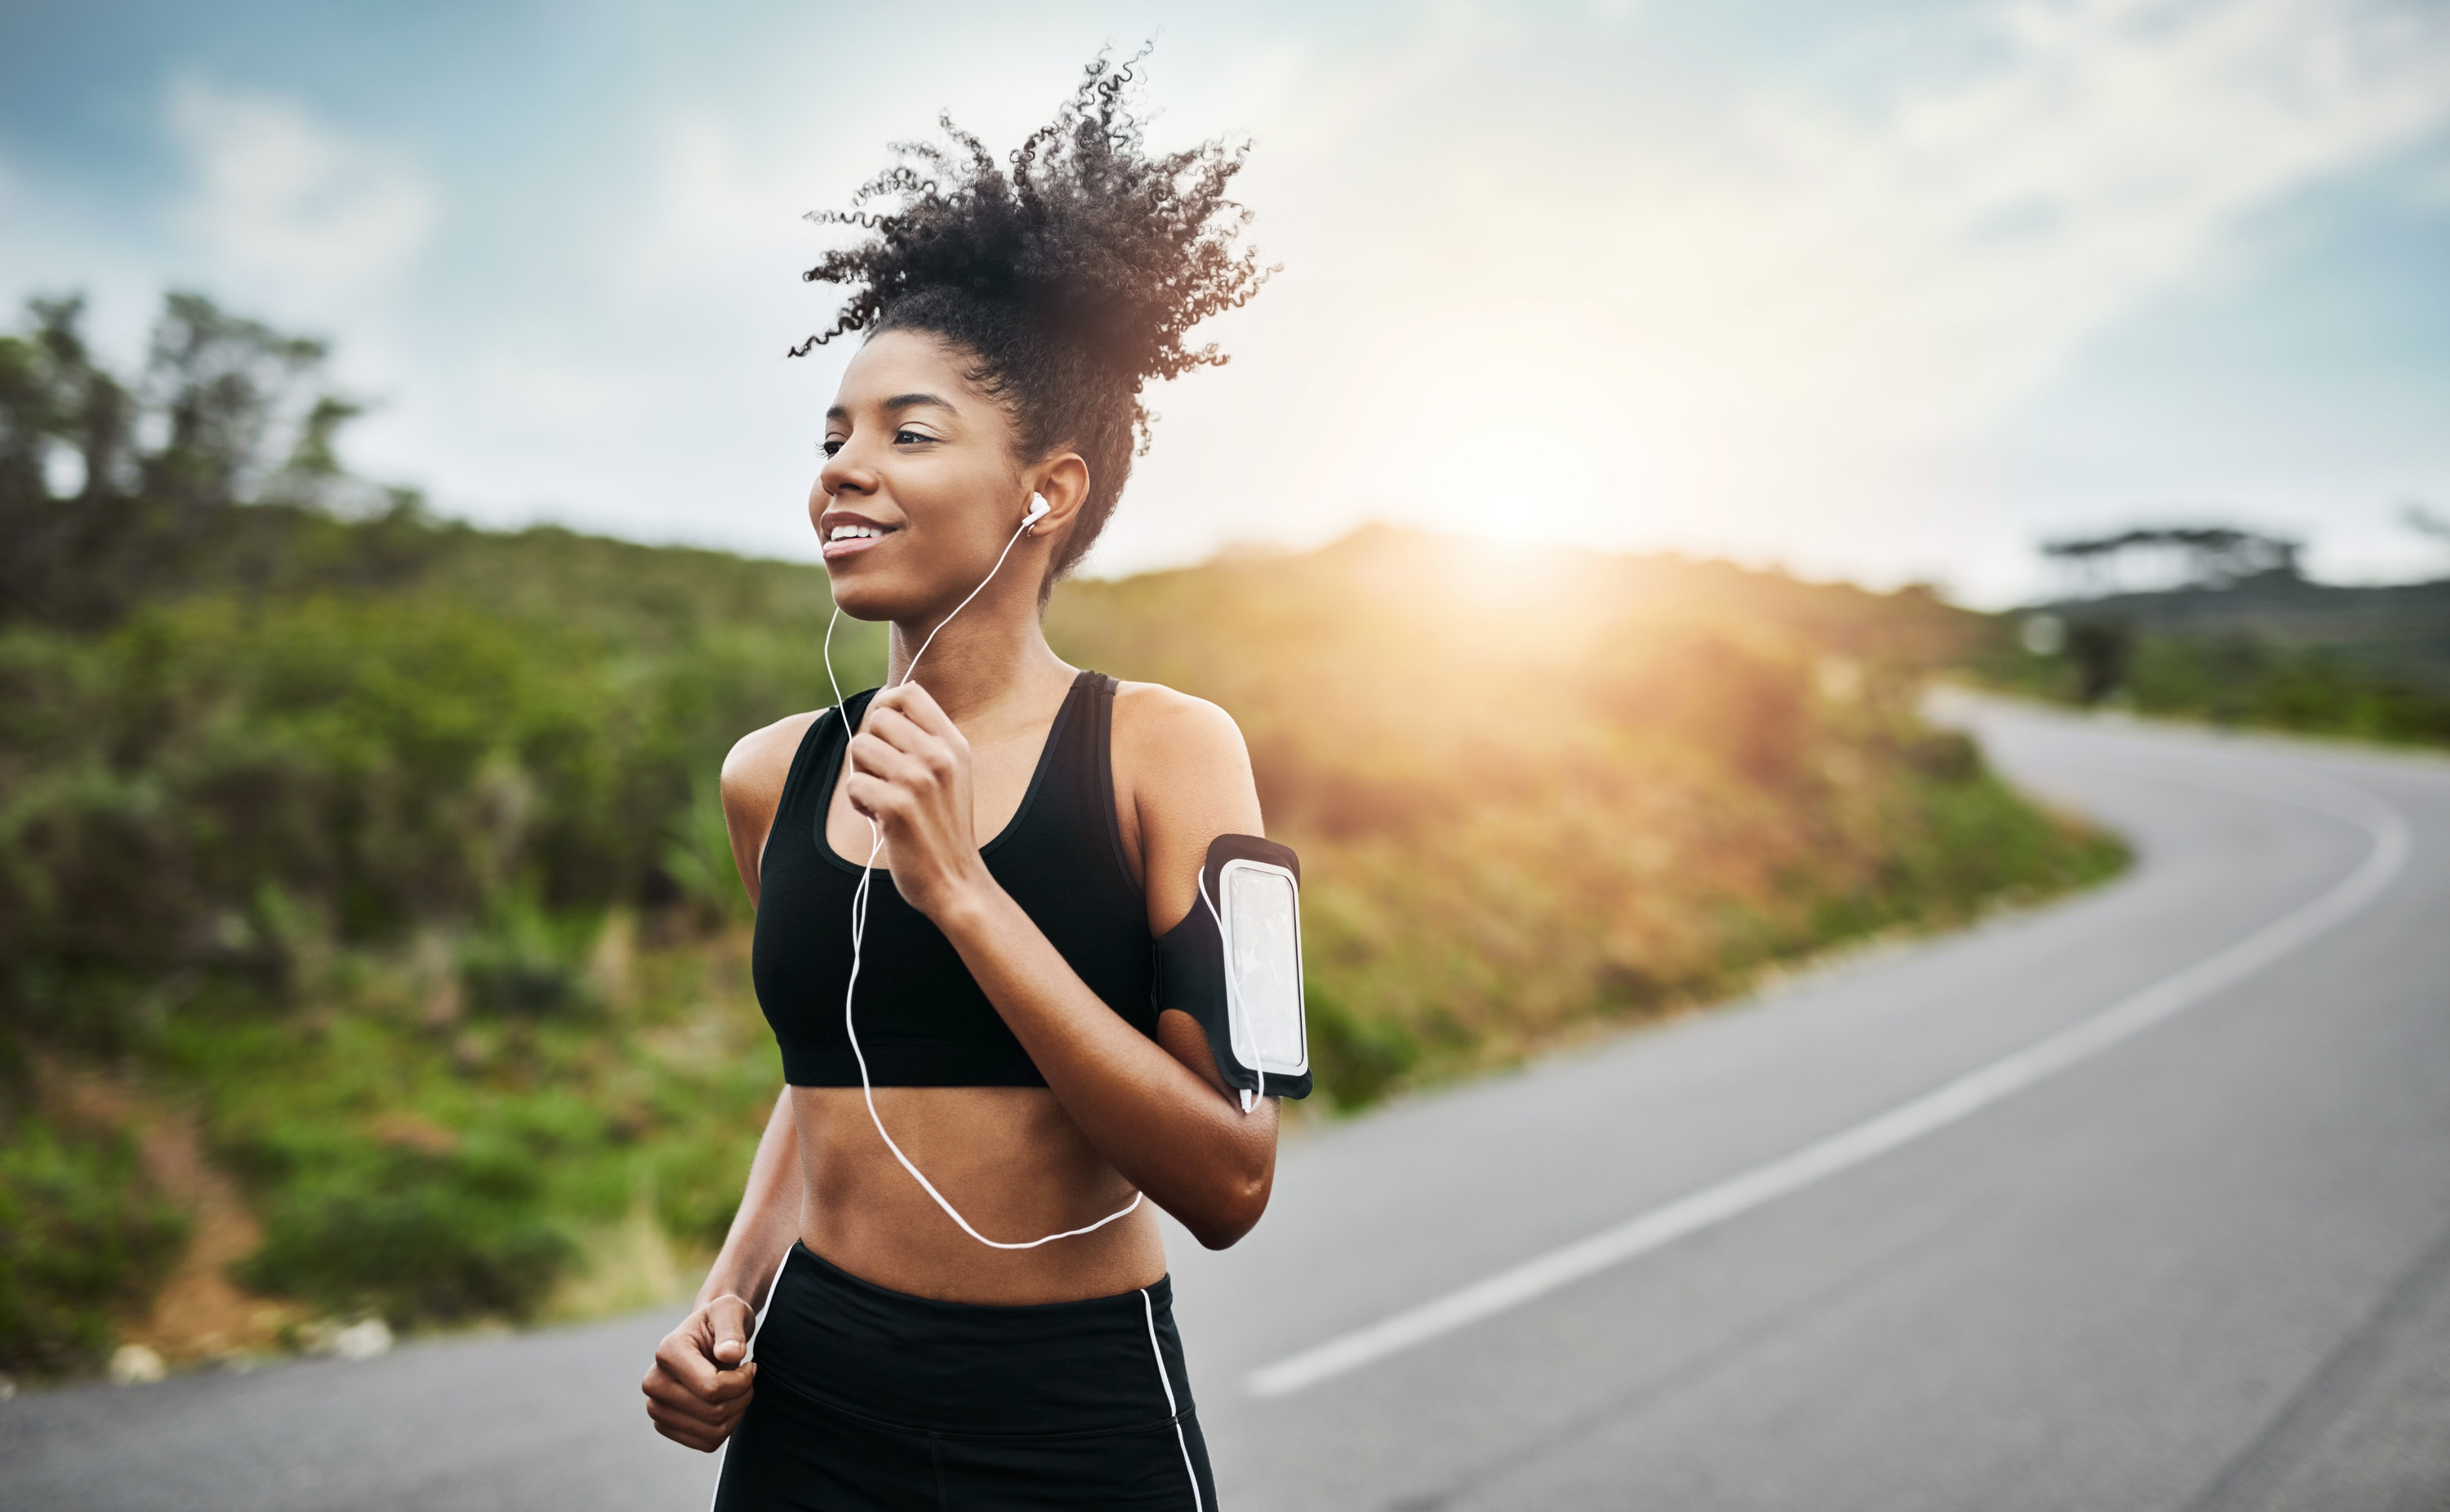 A woman listens to her headphones while she jogs down a country road.